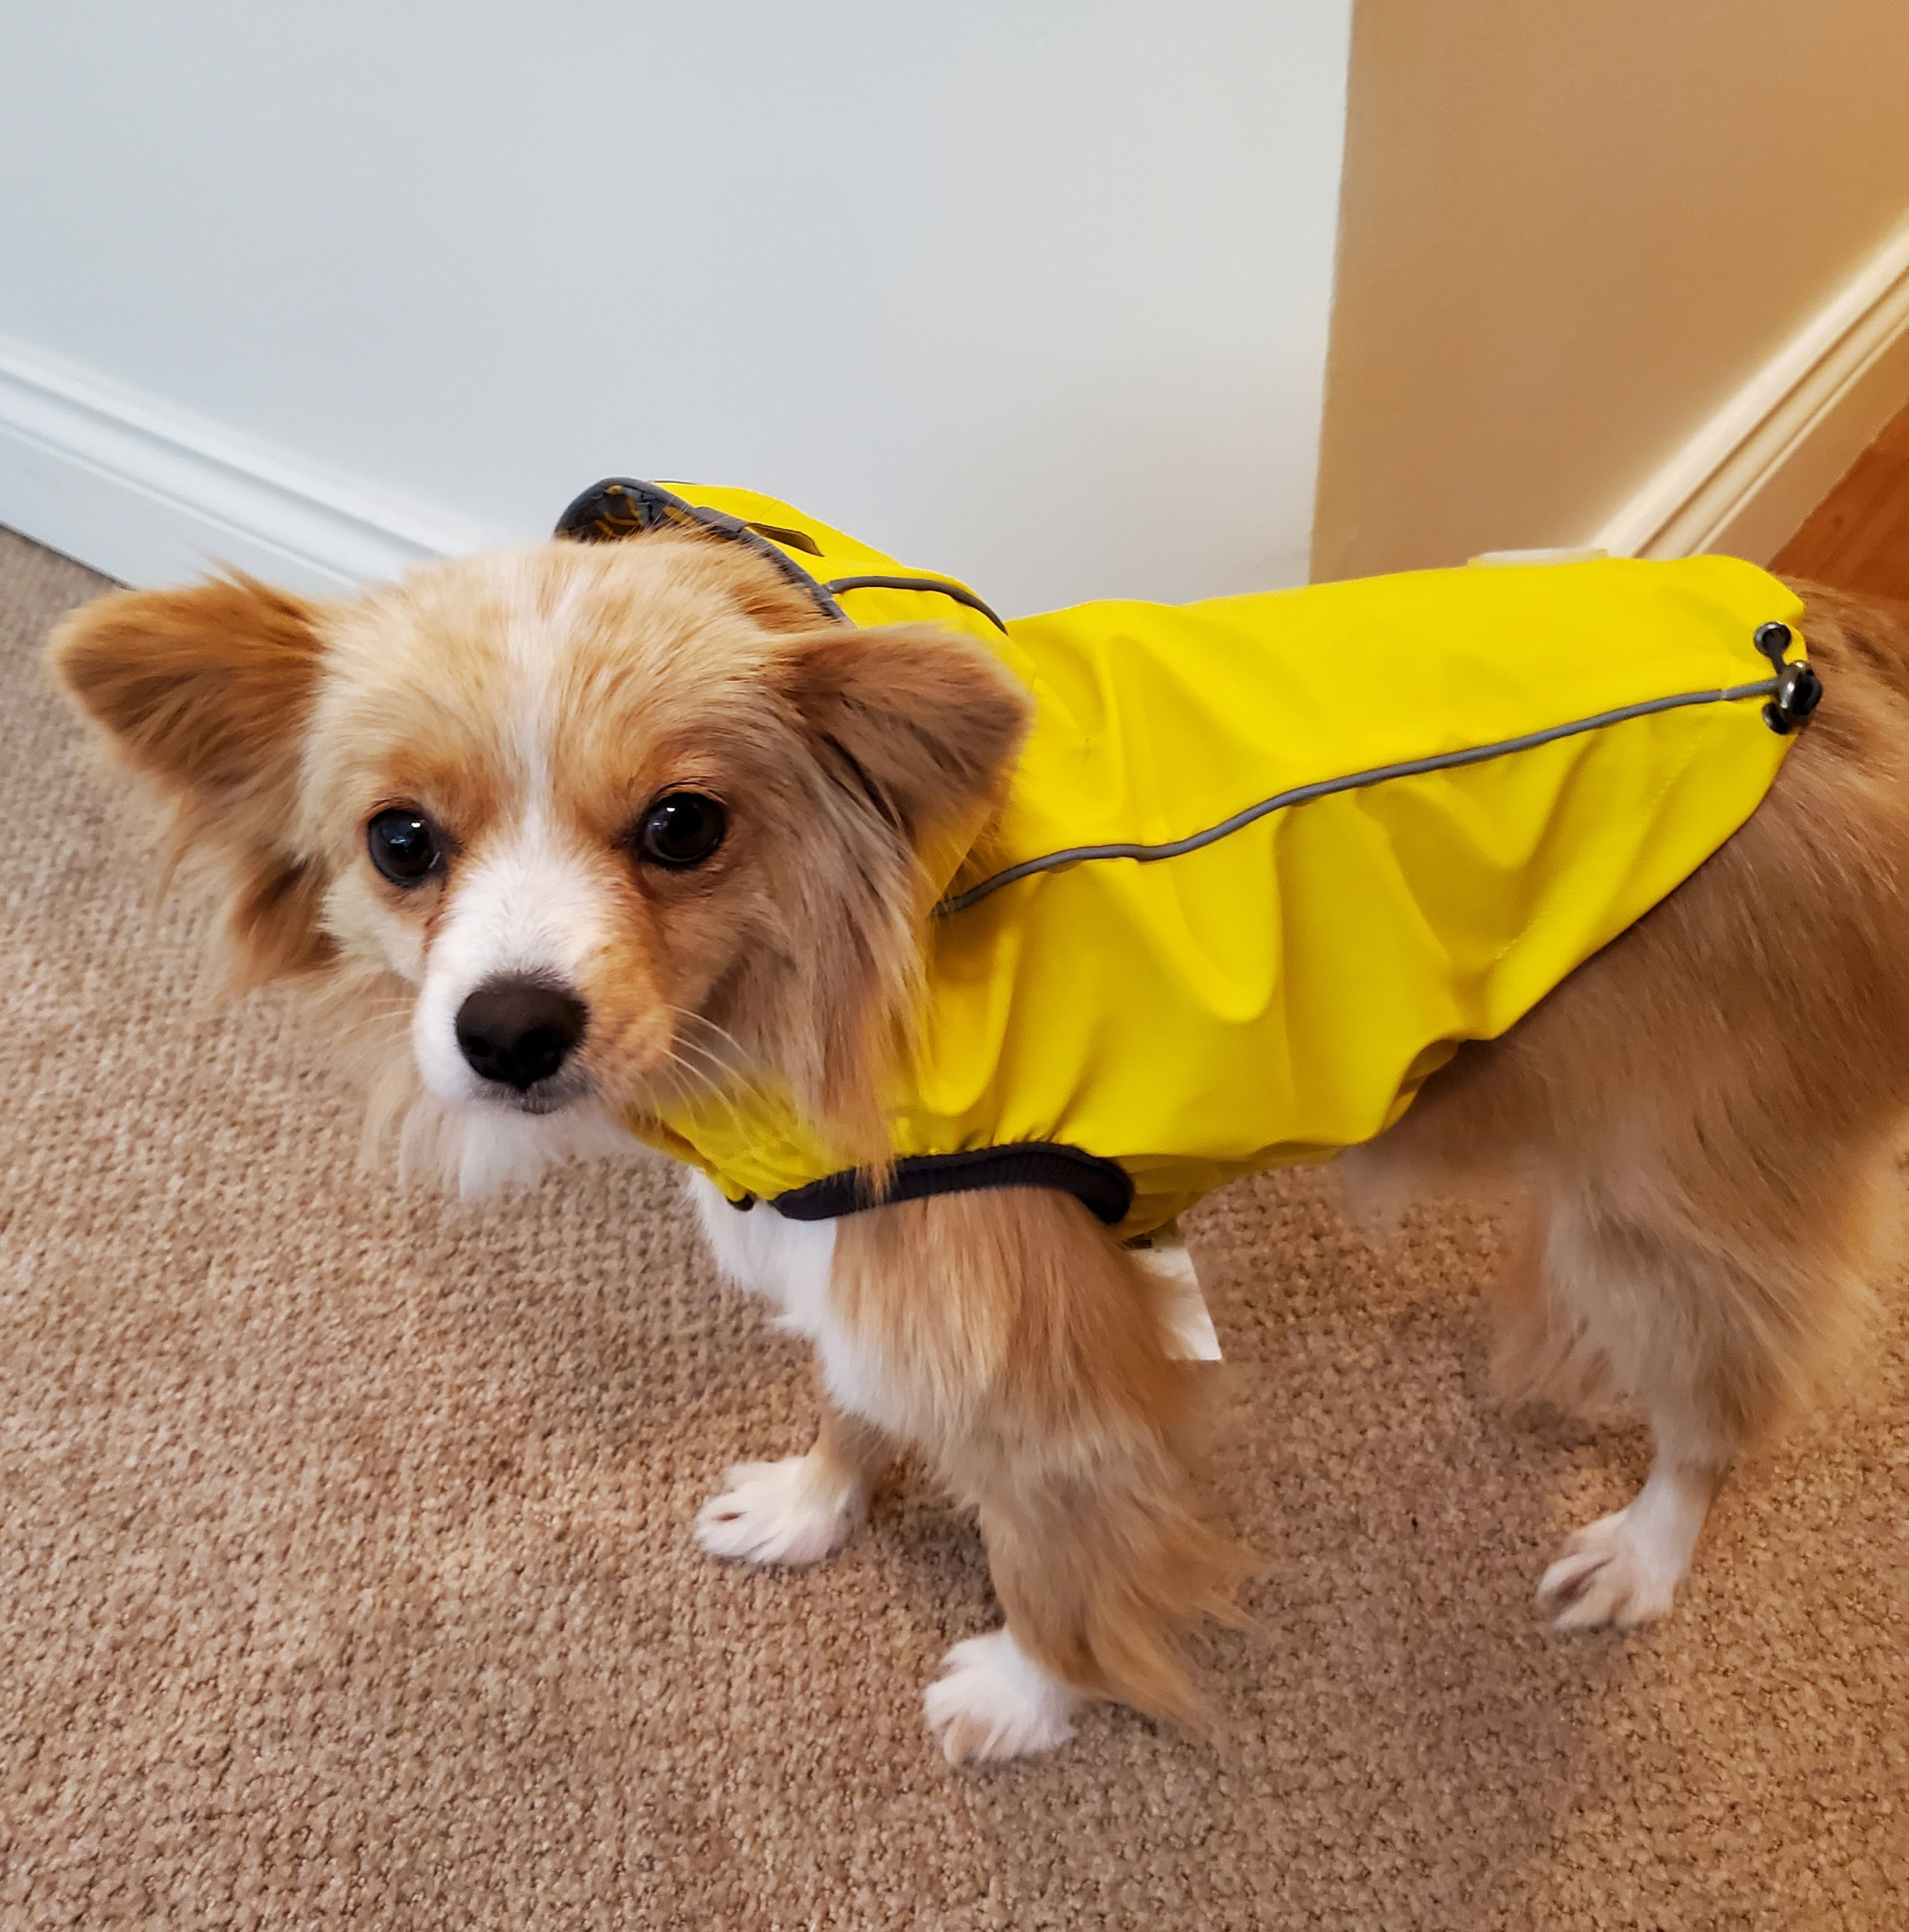 Minnow wearing a yellow raincoat to stay dry